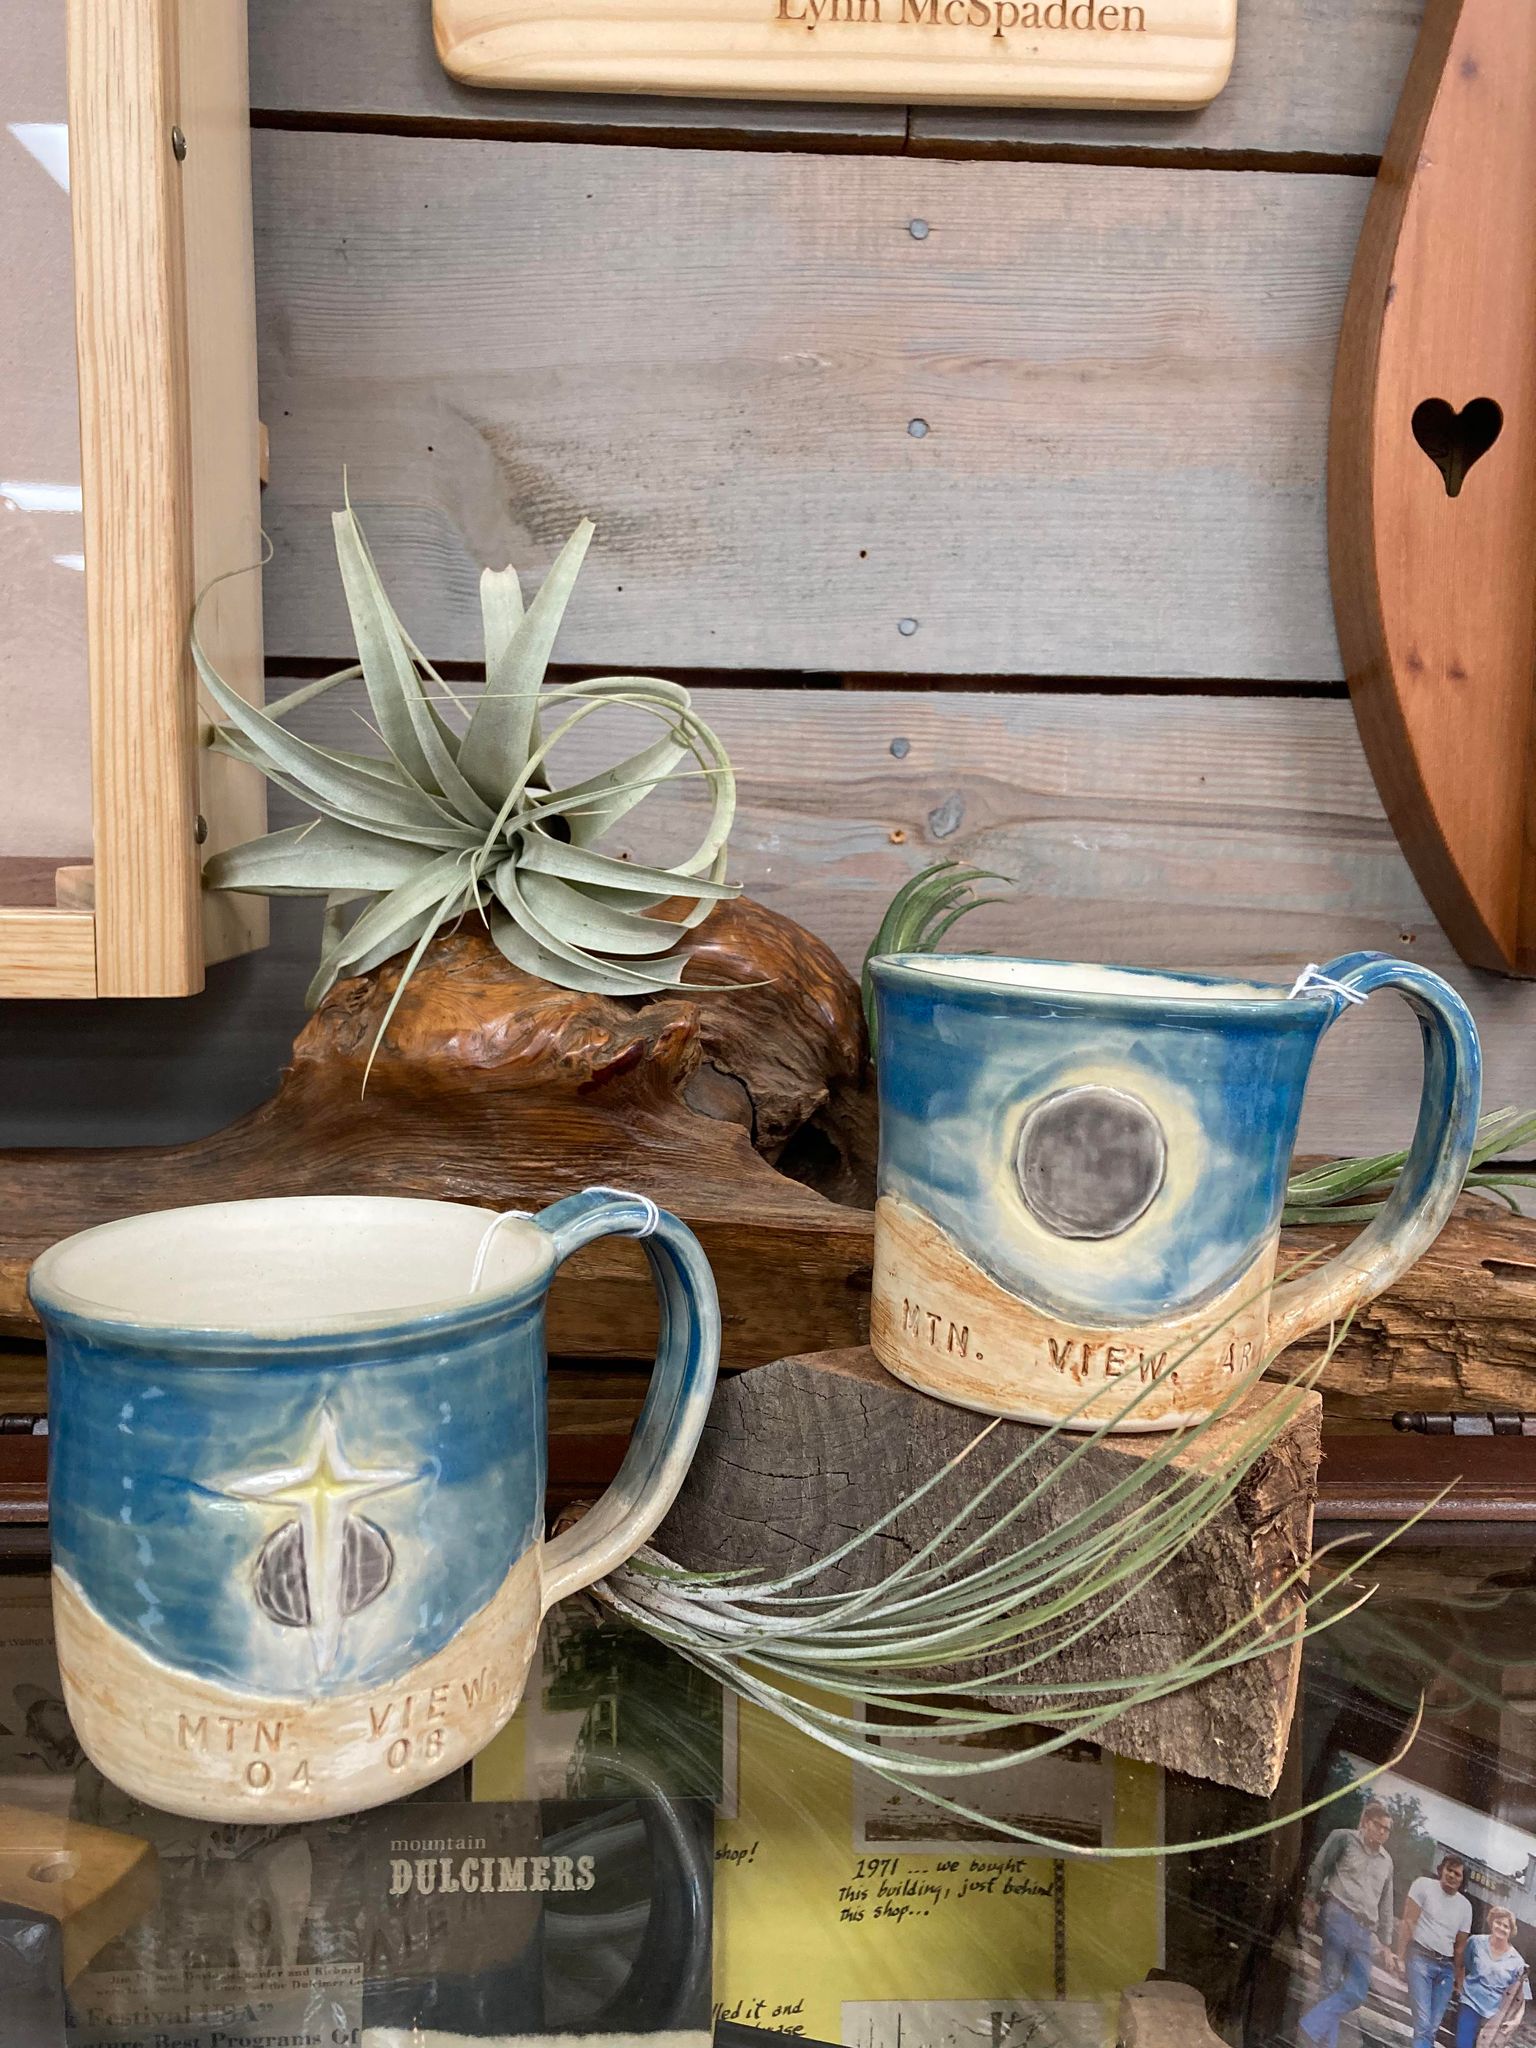 Handcrafted Total Solar Eclipse Pottery Mugs by Marion Ivey on a wooden shelf with artisanal design elements and a decorative air plant.